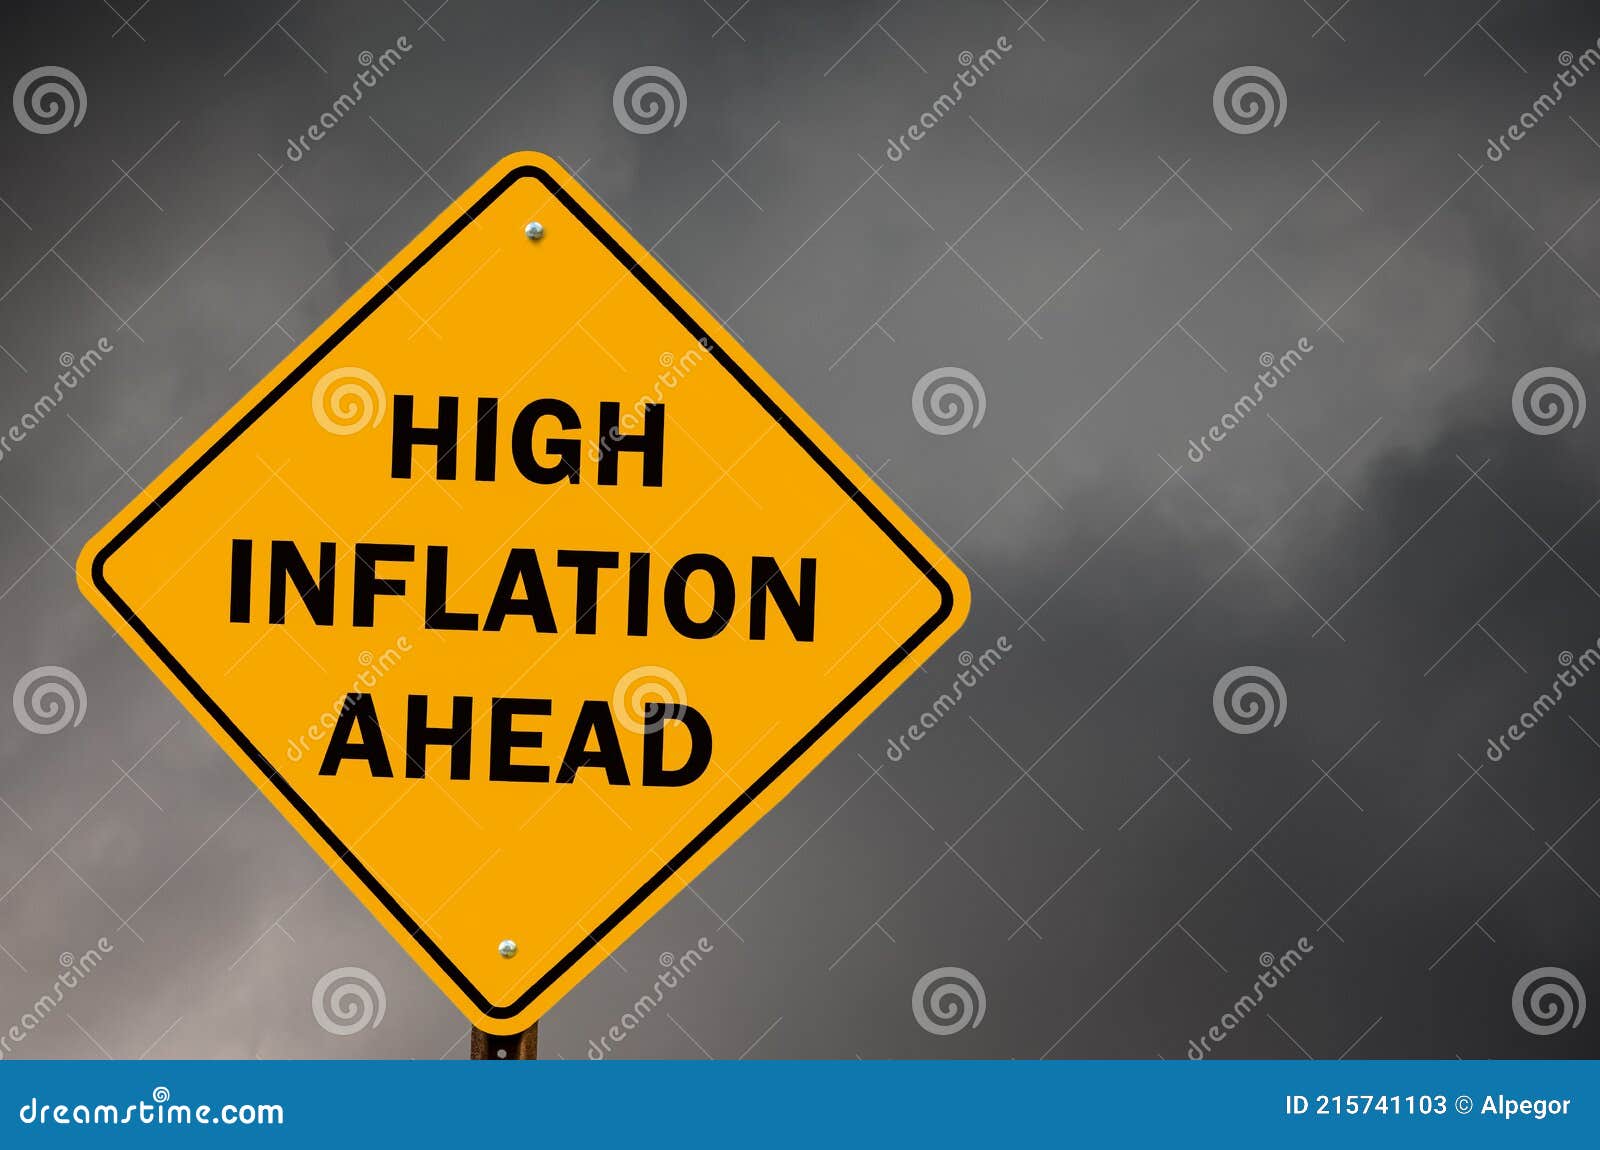 high inflation ahead conceptual traffic sign with stormy sky in background